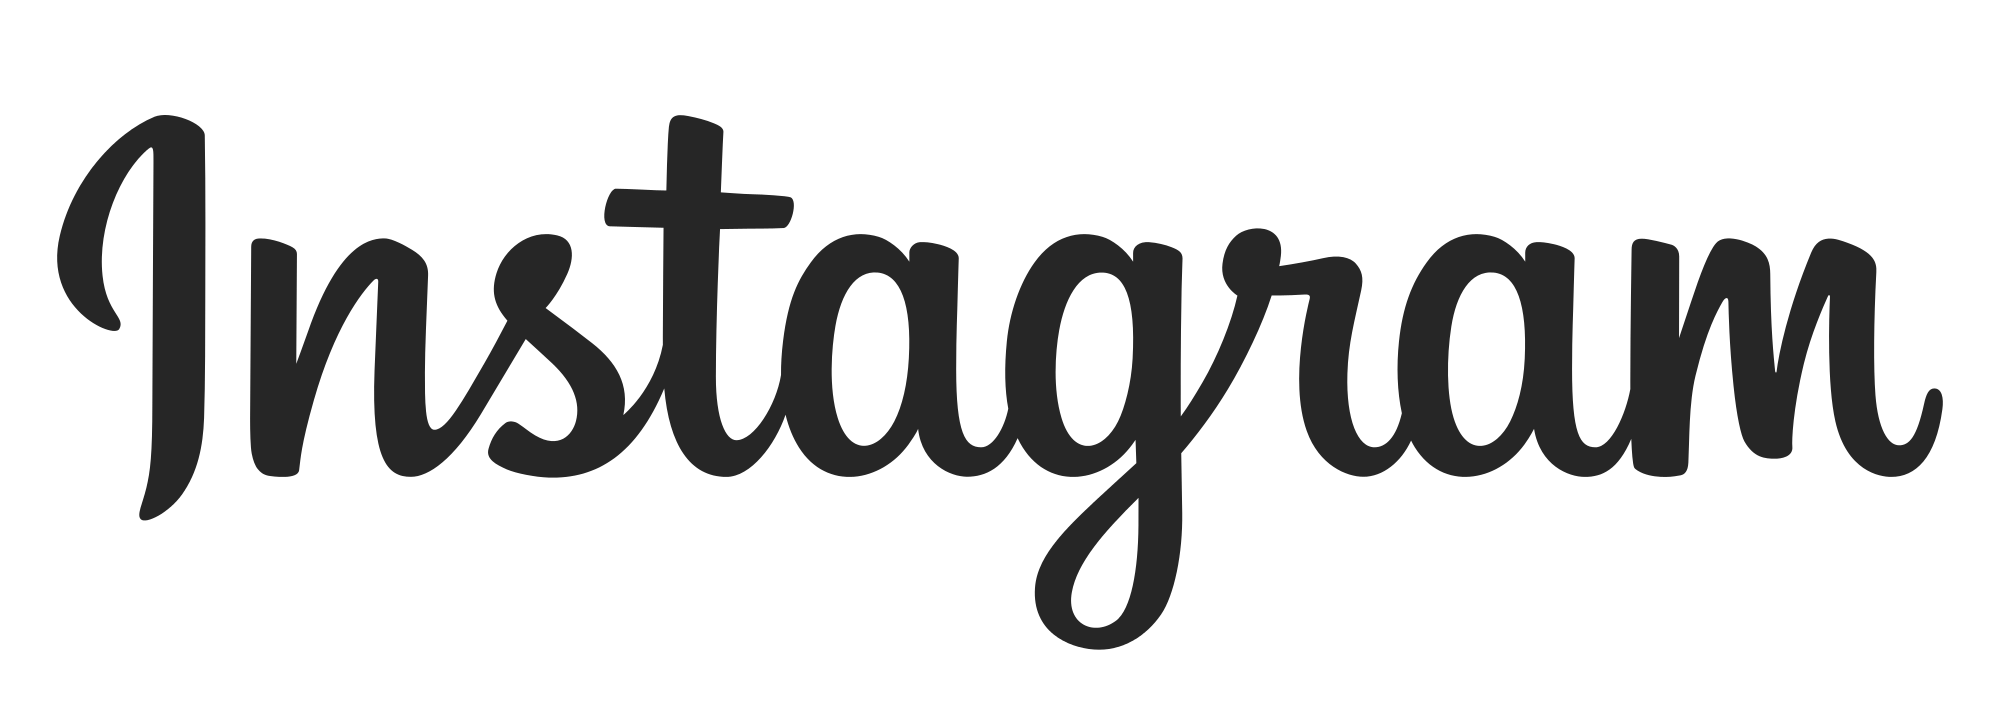 Instagram Logo Png Text